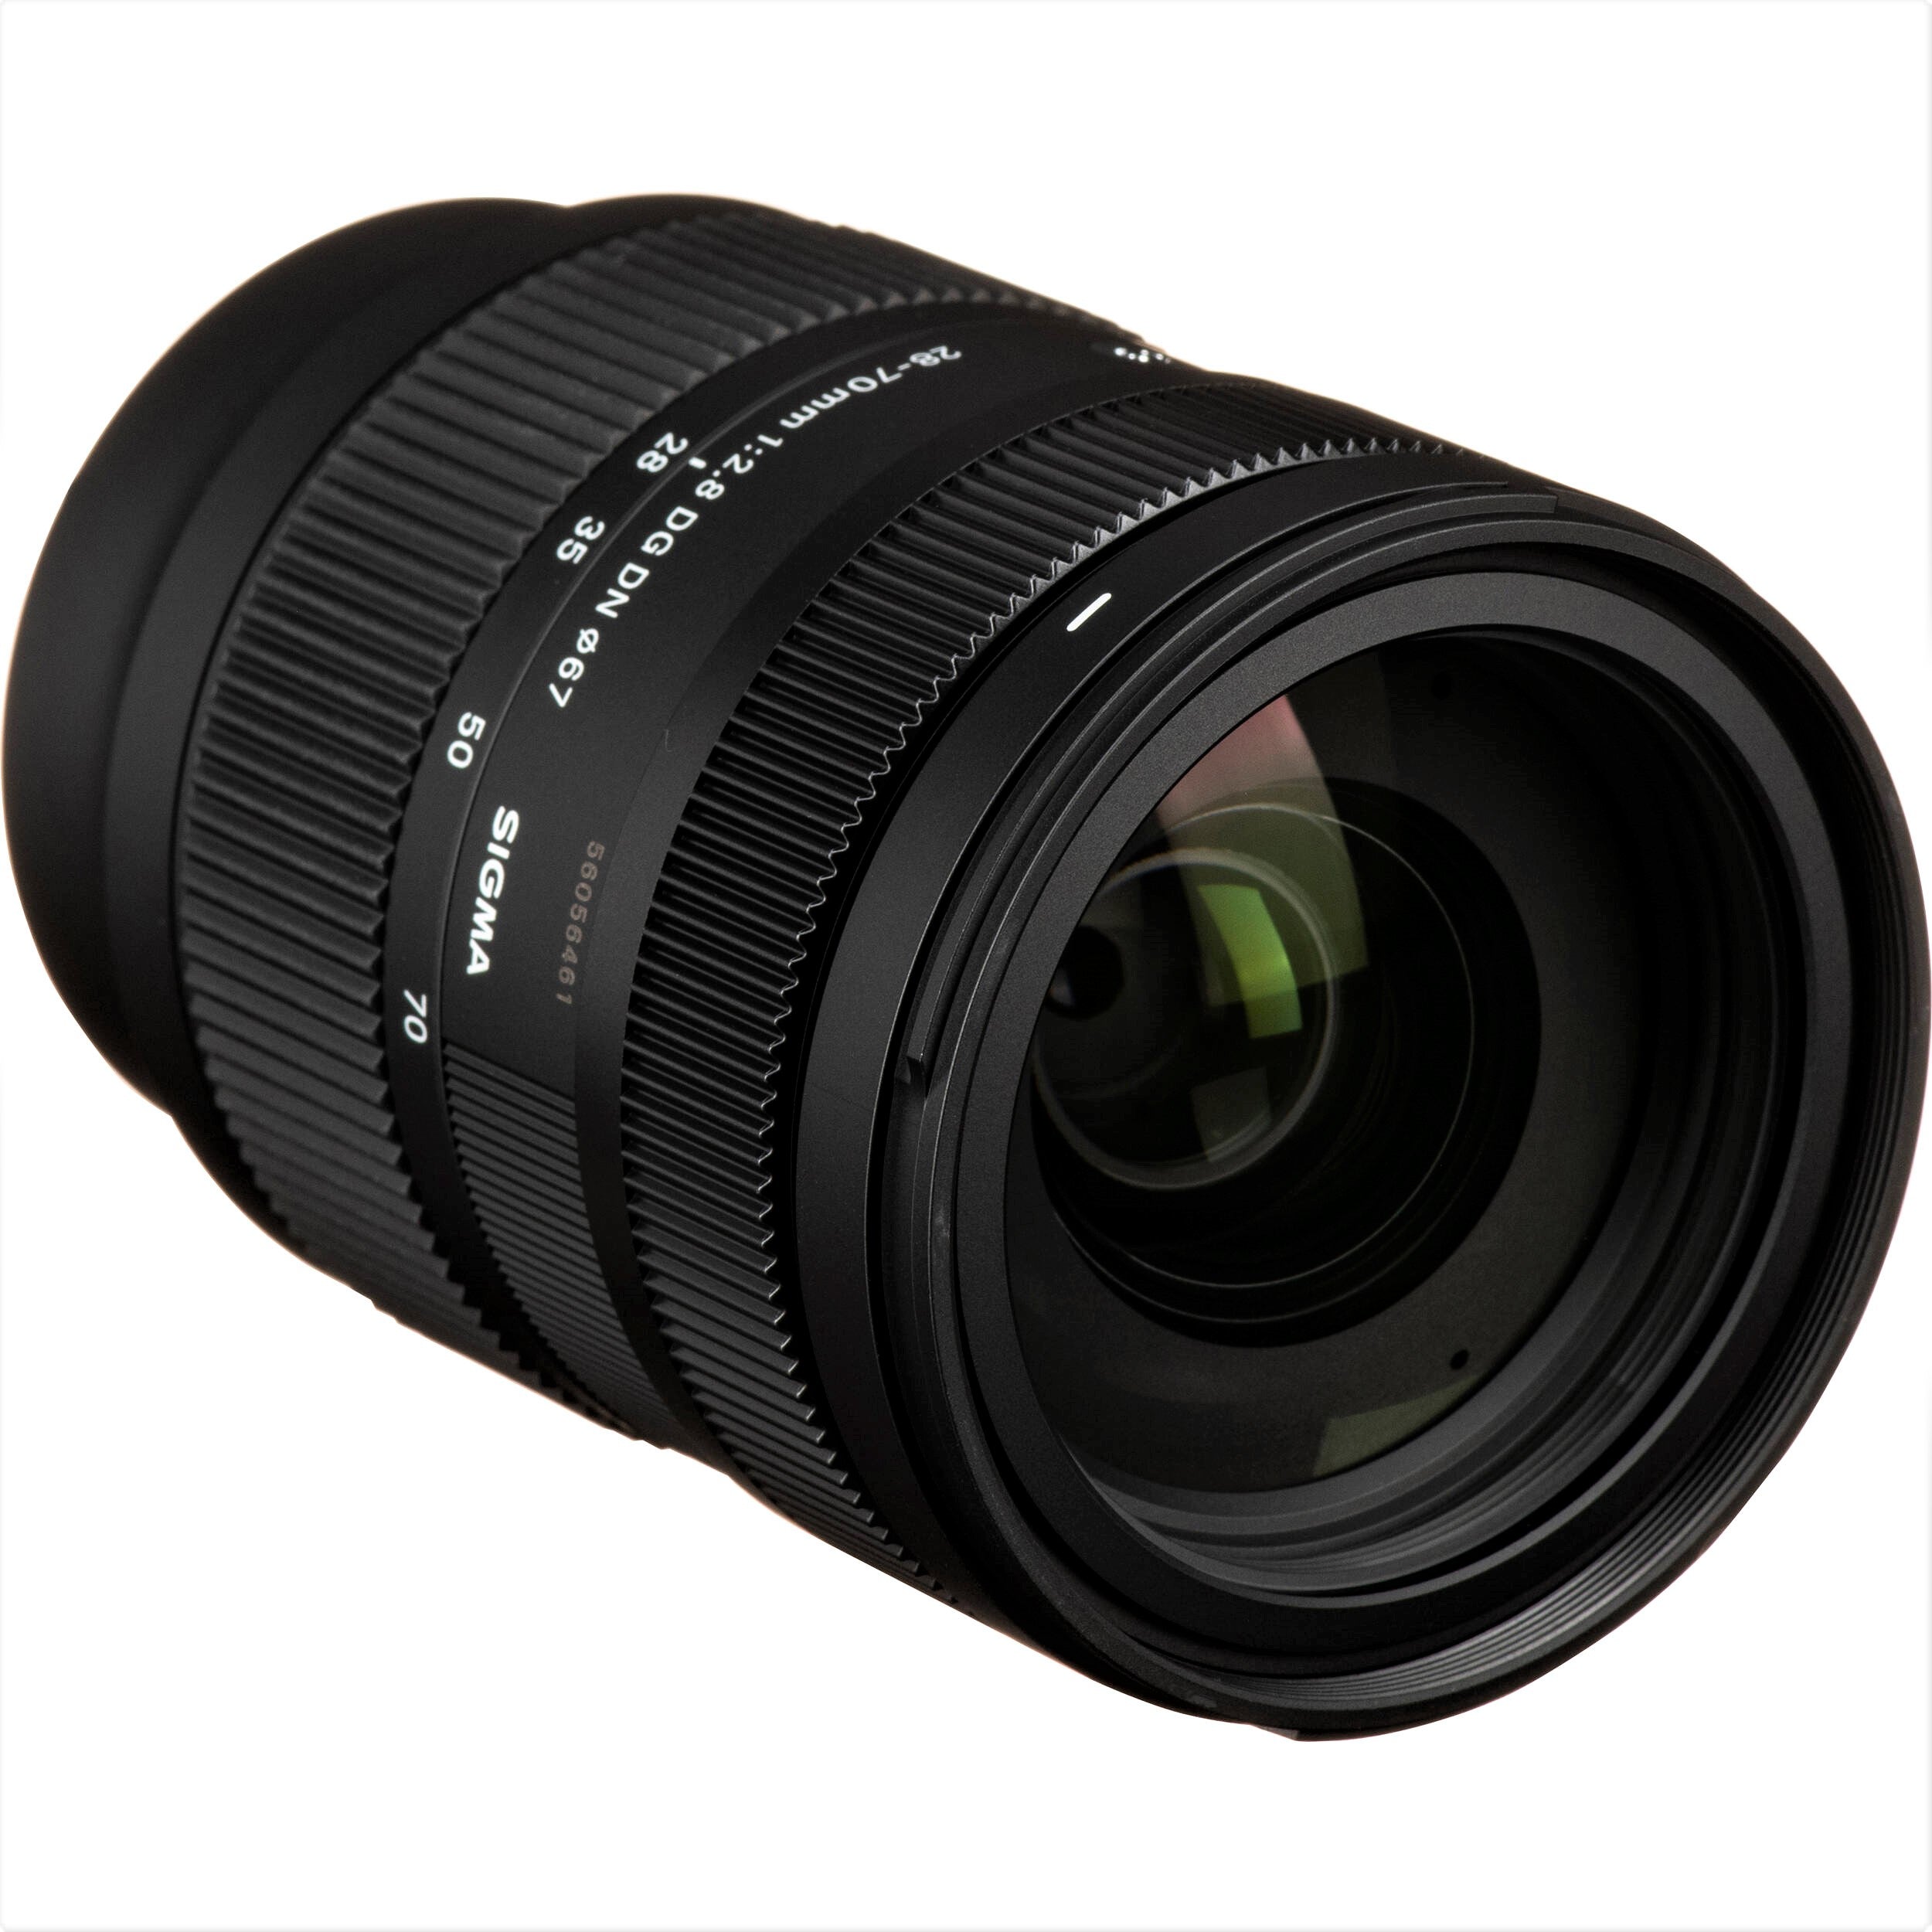 Sigma 28-70mm f/2.8 DG DN Contemporary Lens for Sony E - Front Side View